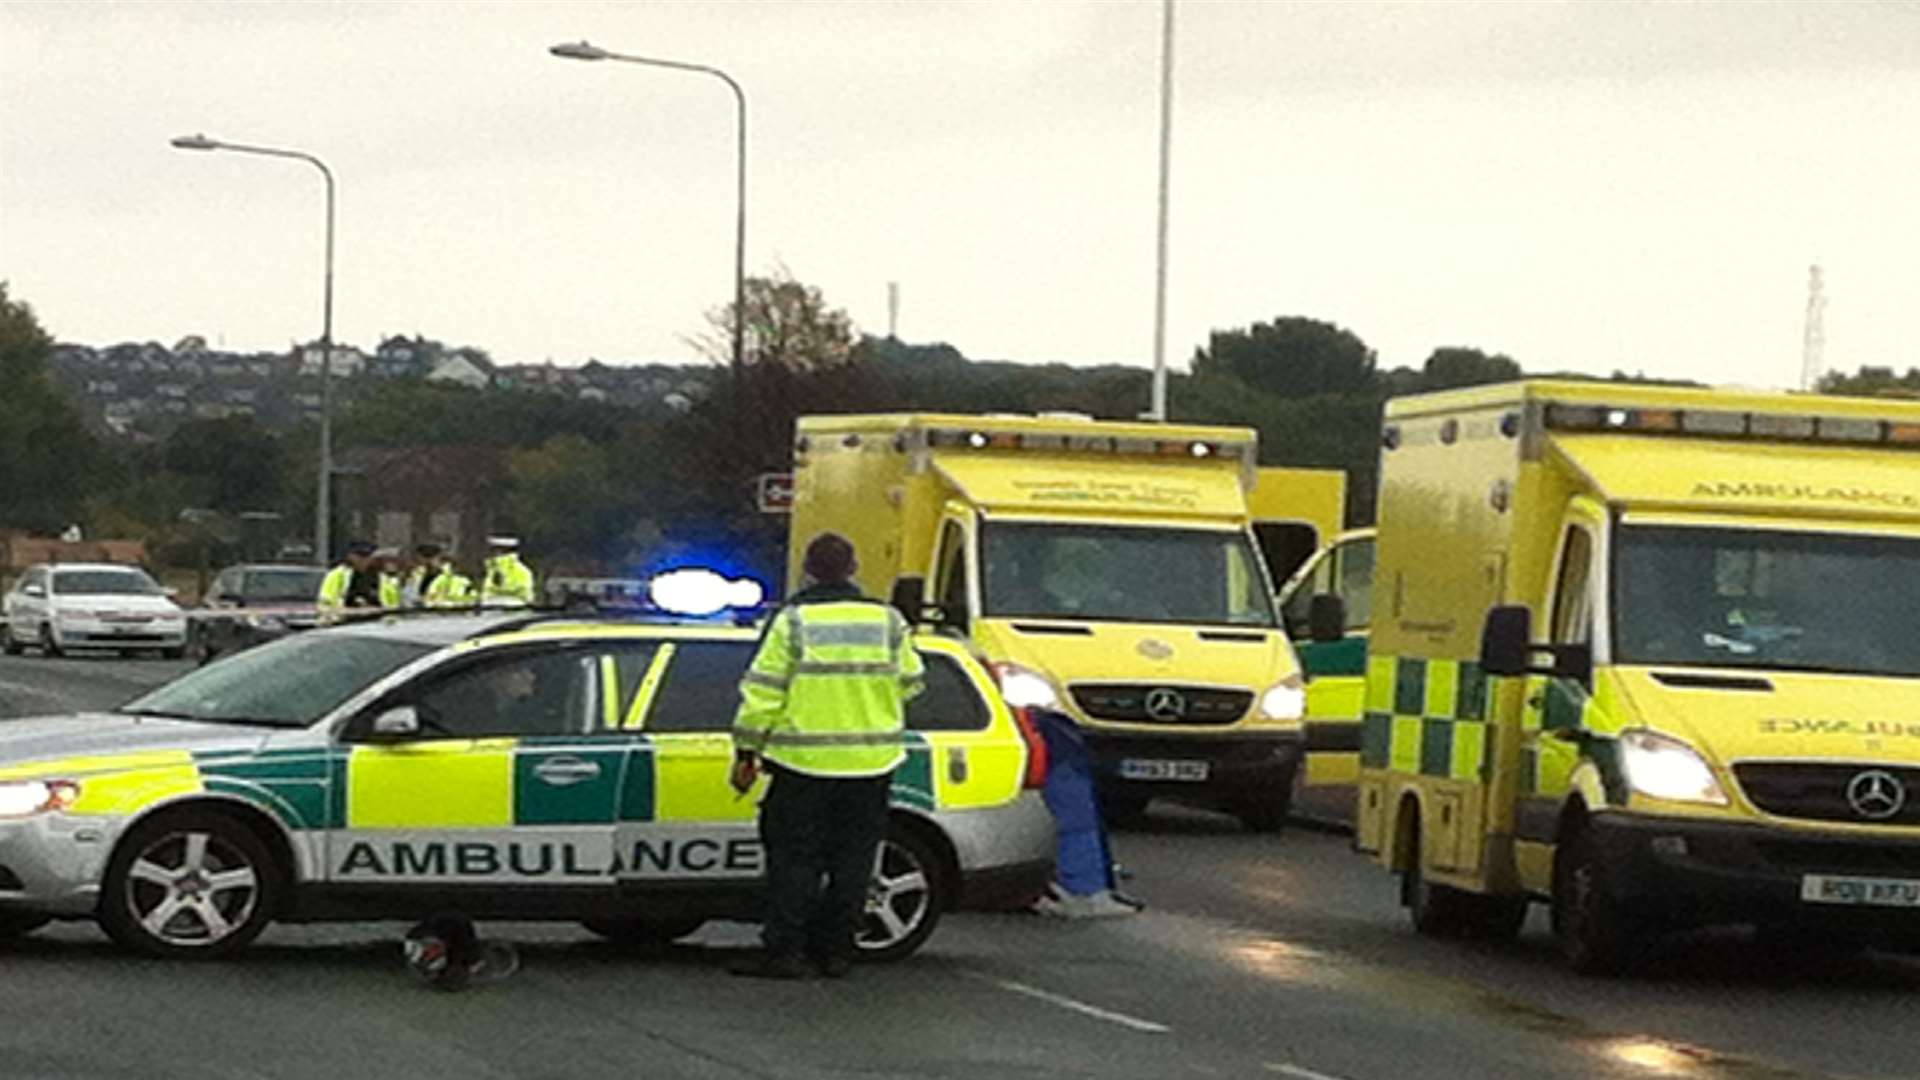 Police and paramedics were called to Charing Hill after a car hit a pedestrian